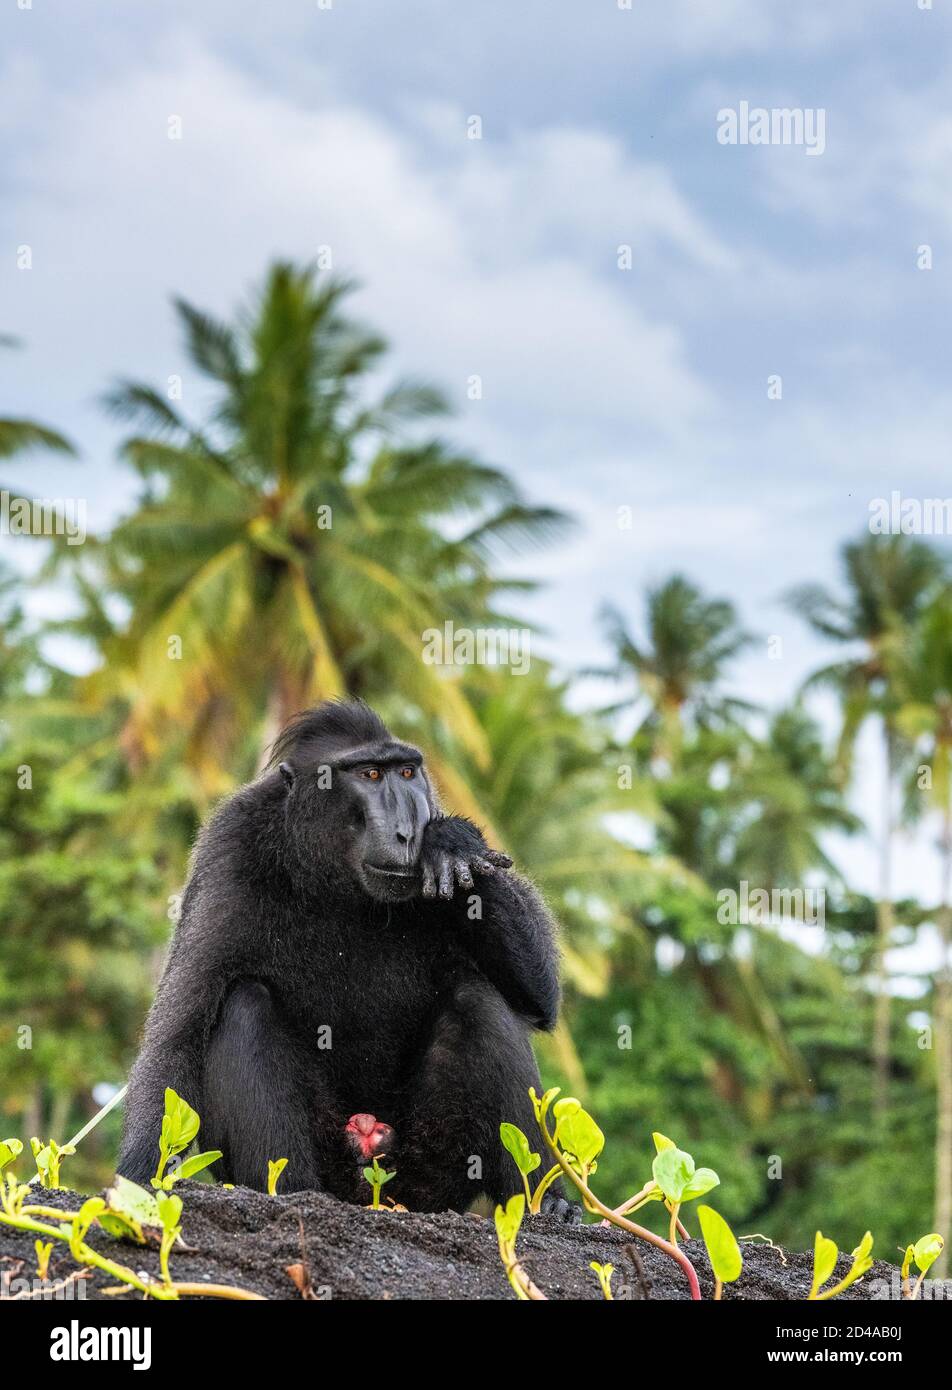 The Celebes crested macaque.  Crested black macaque, Sulawesi crested macaque, celebes macaque or the black ape. Wild nature. Natural habitat. Sulawes Stock Photo